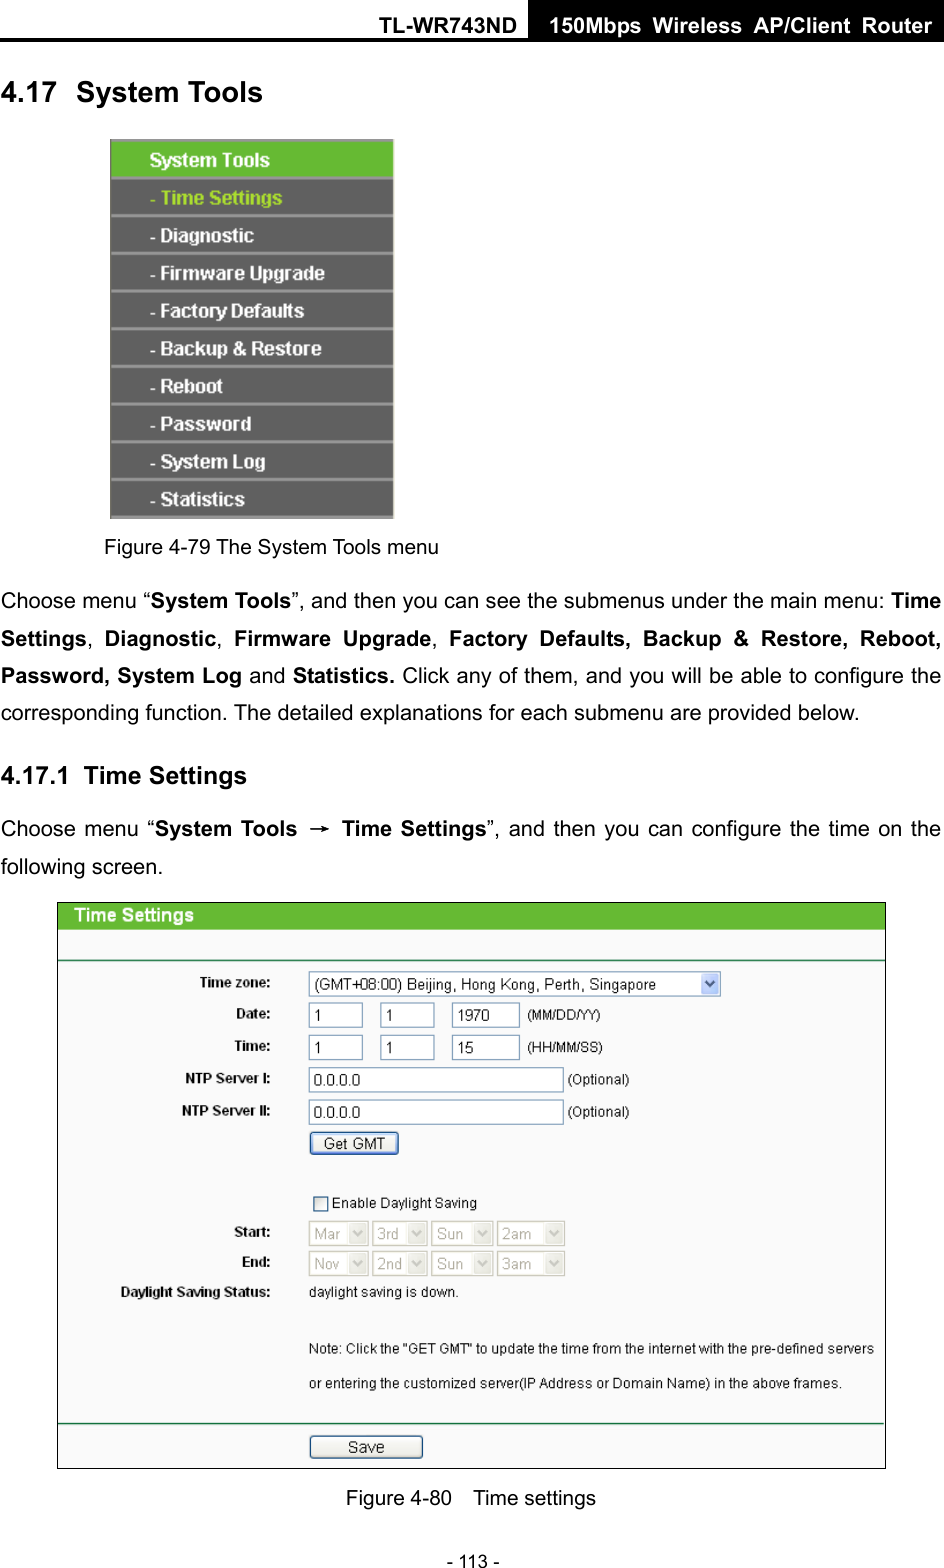 TL-WR743ND 150Mbps Wireless AP/Client Router - 113 - 4.17  System Tools  Figure 4-79 The System Tools menu Choose menu “System Tools”, and then you can see the submenus under the main menu: Time Settings,  Diagnostic,  Firmware Upgrade,  Factory Defaults, Backup &amp; Restore, Reboot, Password, System Log and Statistics. Click any of them, and you will be able to configure the corresponding function. The detailed explanations for each submenu are provided below. 4.17.1  Time Settings Choose menu “System Tools  → Time Settings”, and then you can configure the time on the following screen.  Figure 4-80  Time settings 